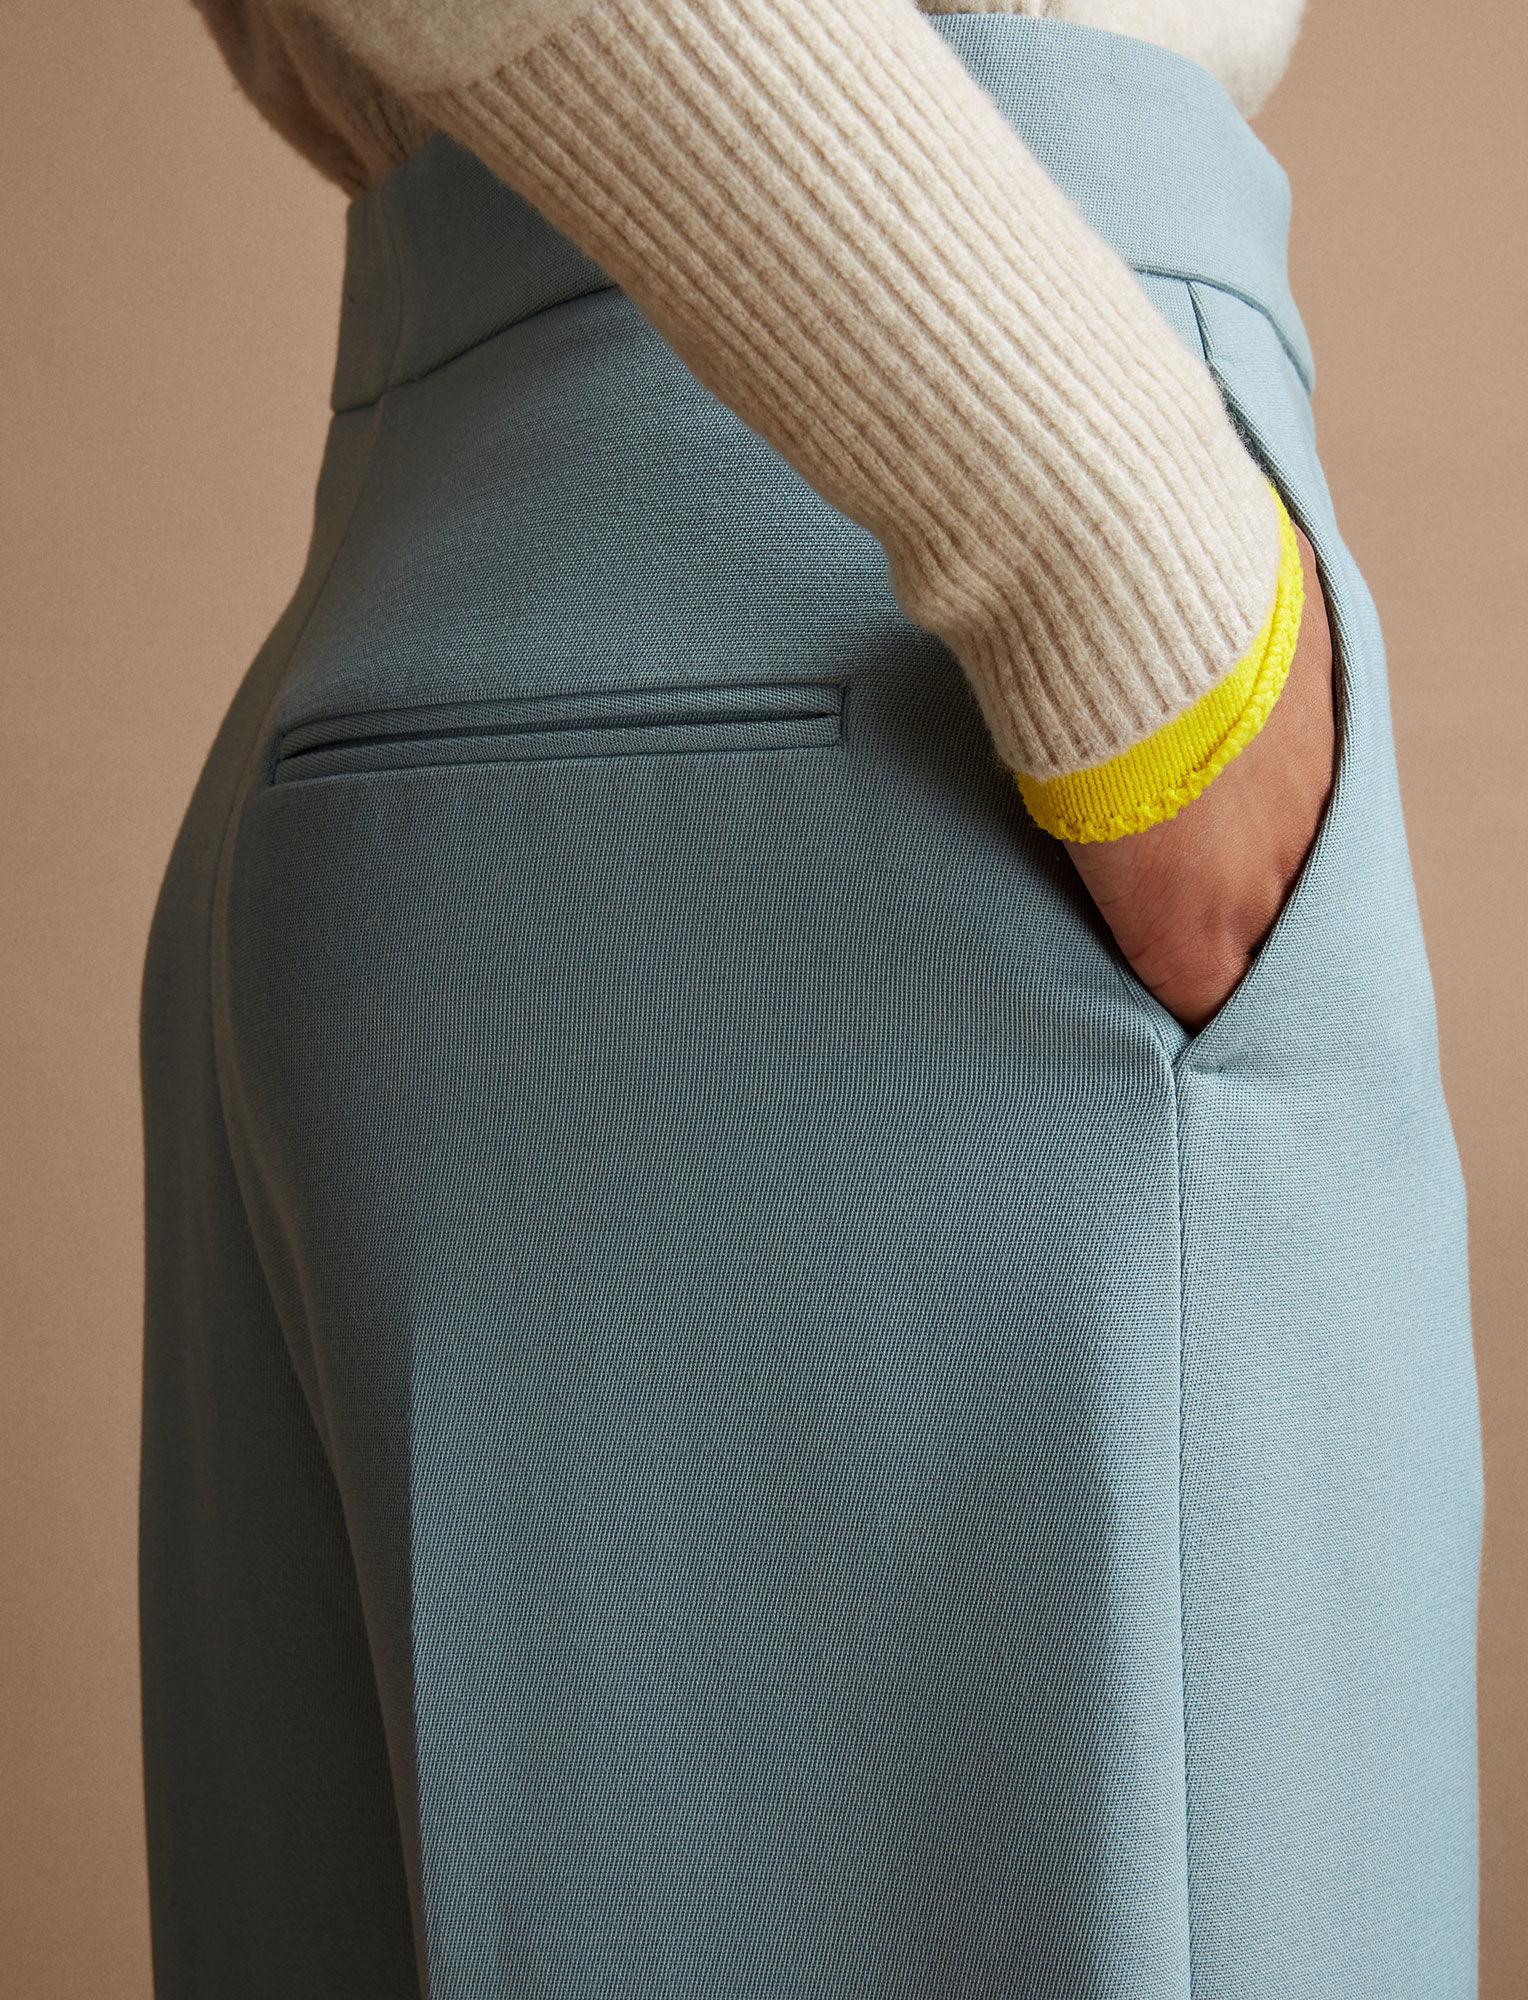 JOSEPH Haim Tailoring Canvas Trousers in Mint (Blue) - Lyst